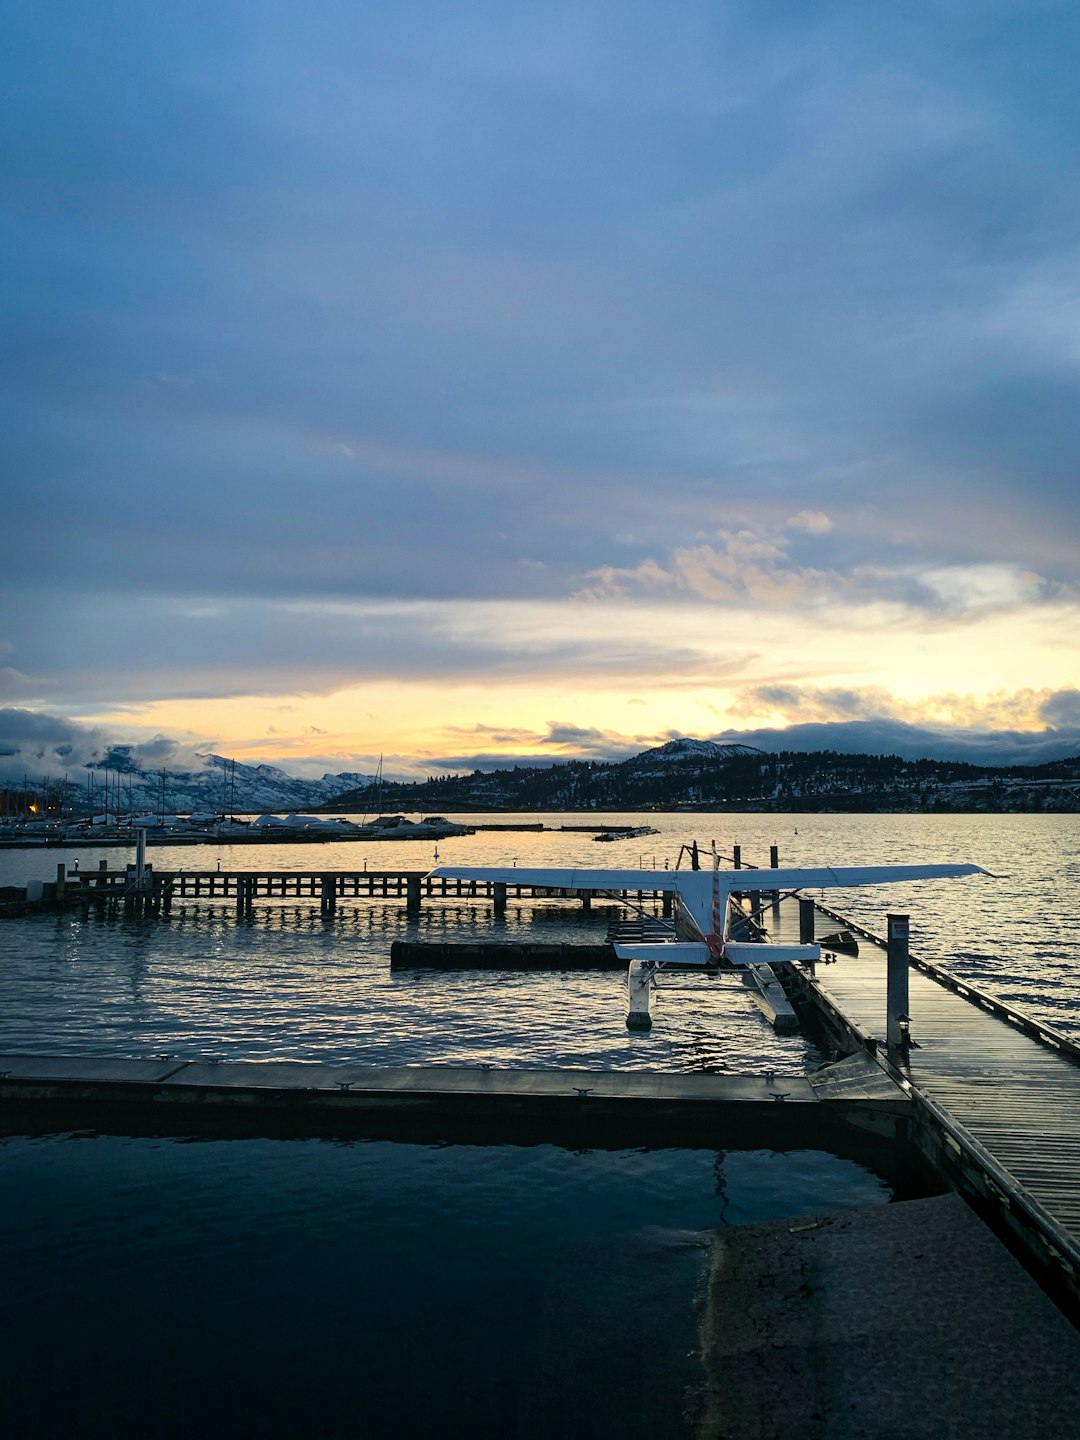 Travel Tips and Stories of Kelowna in Canada